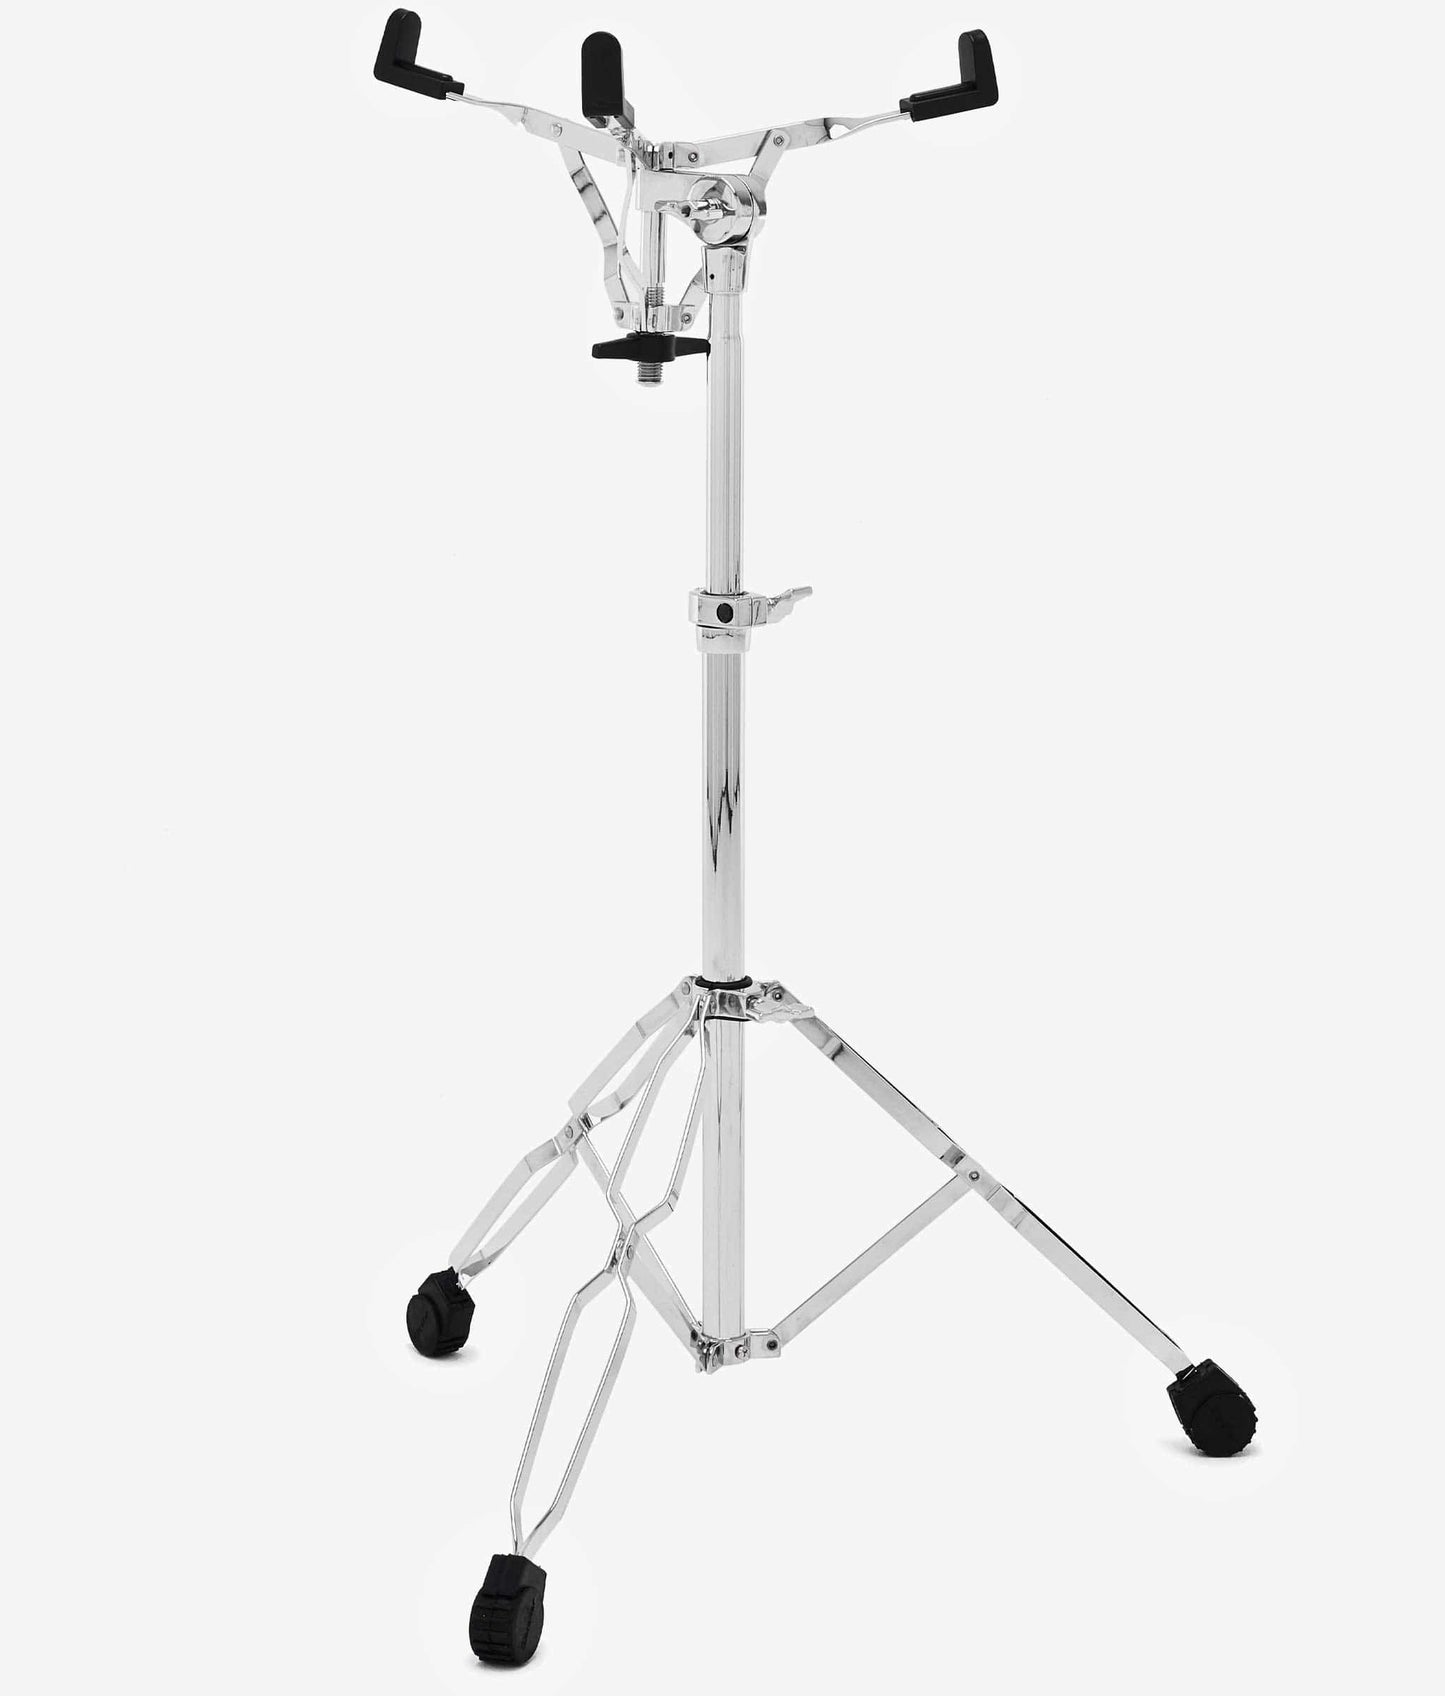  Gibraltar 5706EX Concert Snare Drum Stand tall snare drum stand